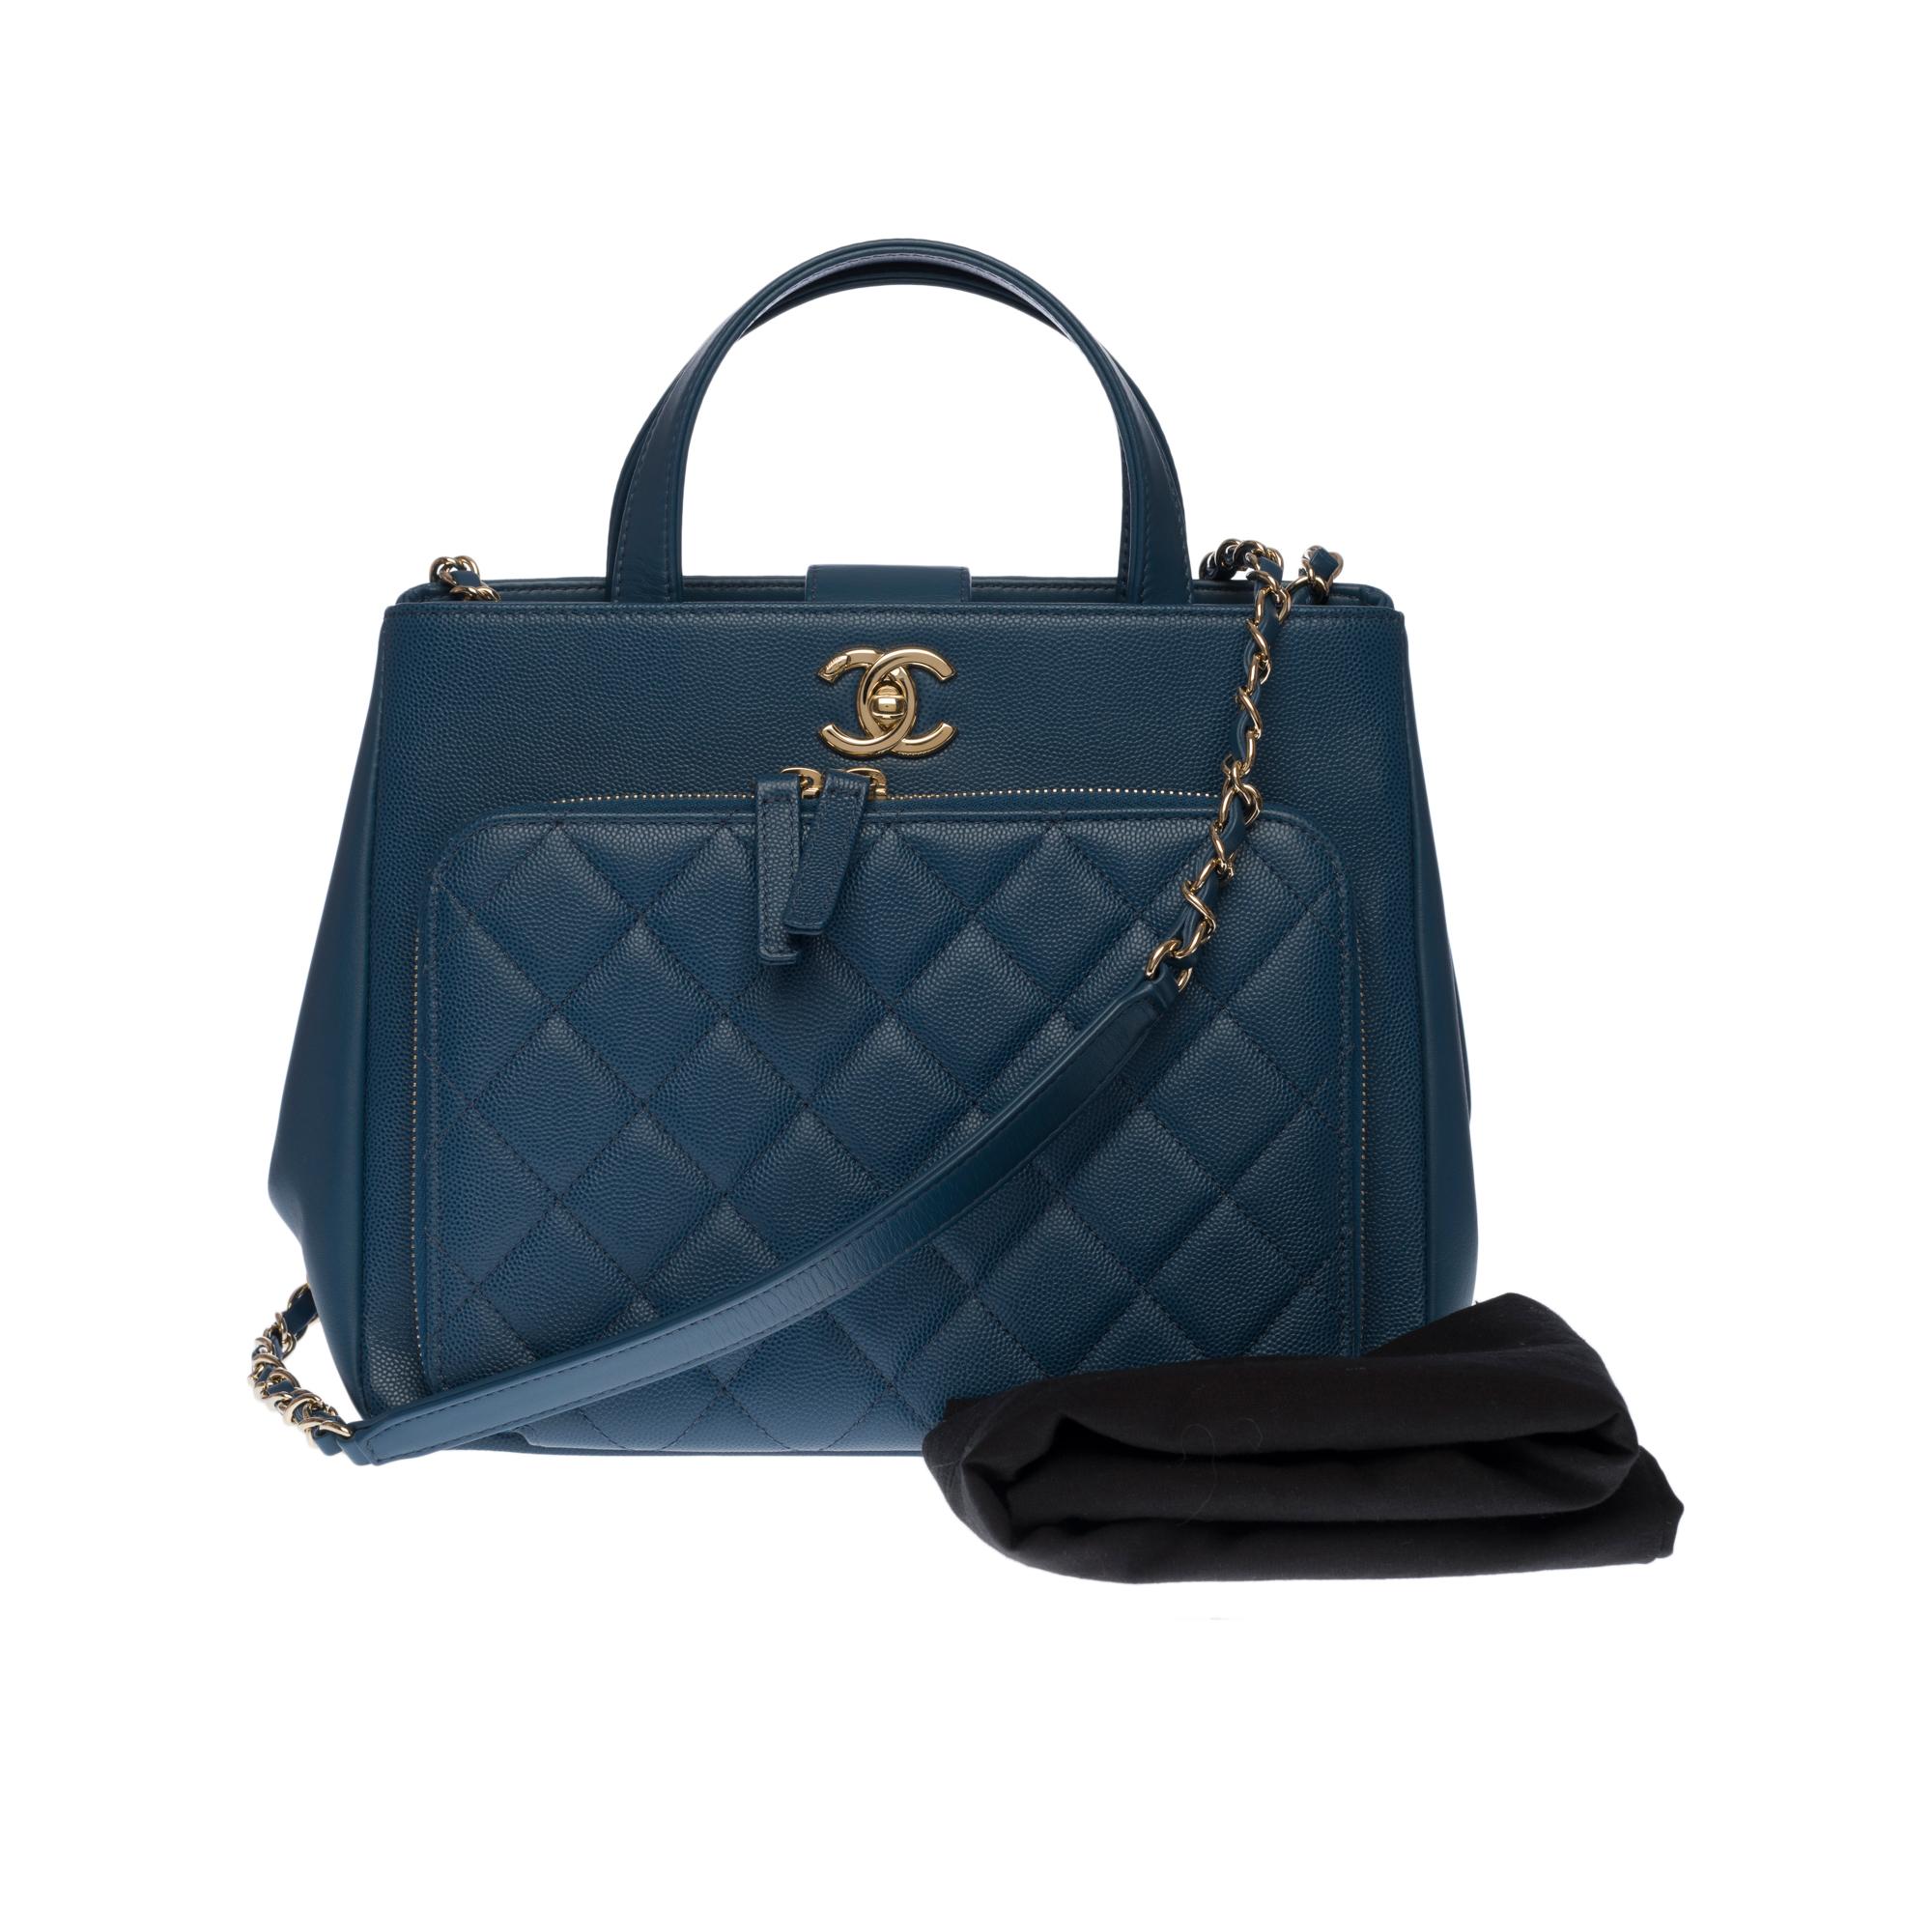 Chanel Business Affinity Tote bag in blue caviar quilted leather, GHW 6